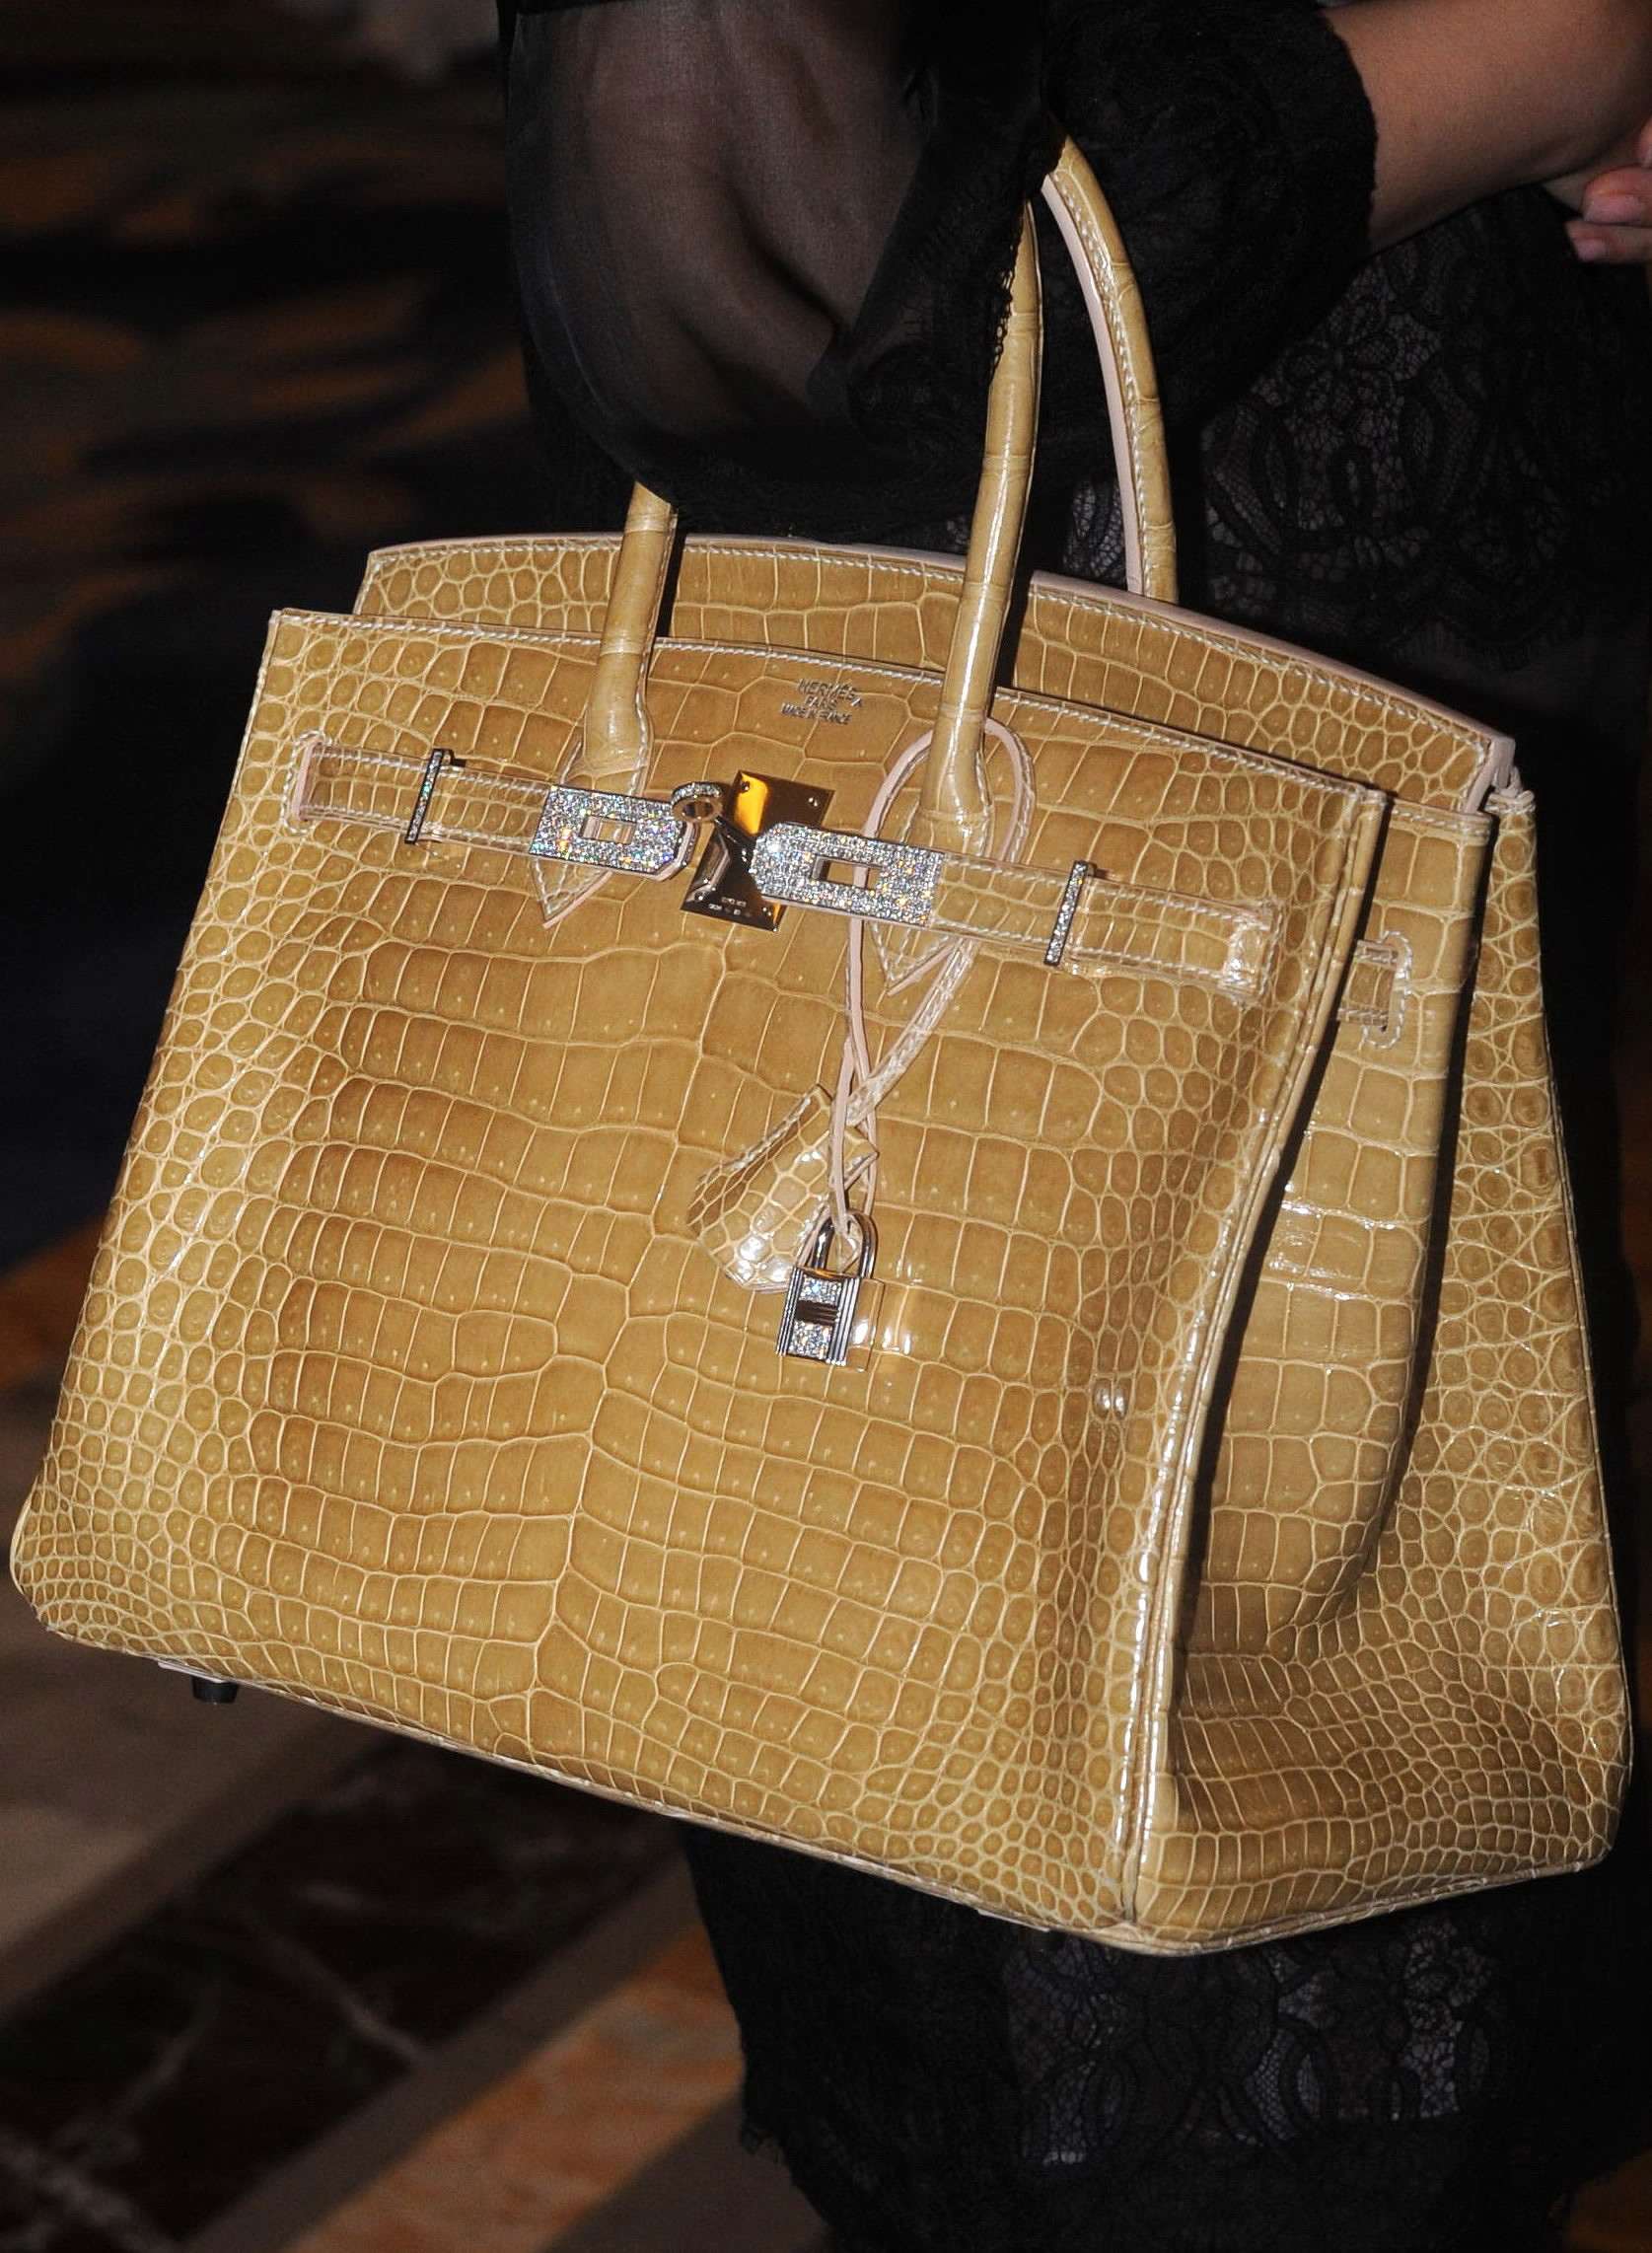 A handbag? For just $380,000 it's yours! - CGTN